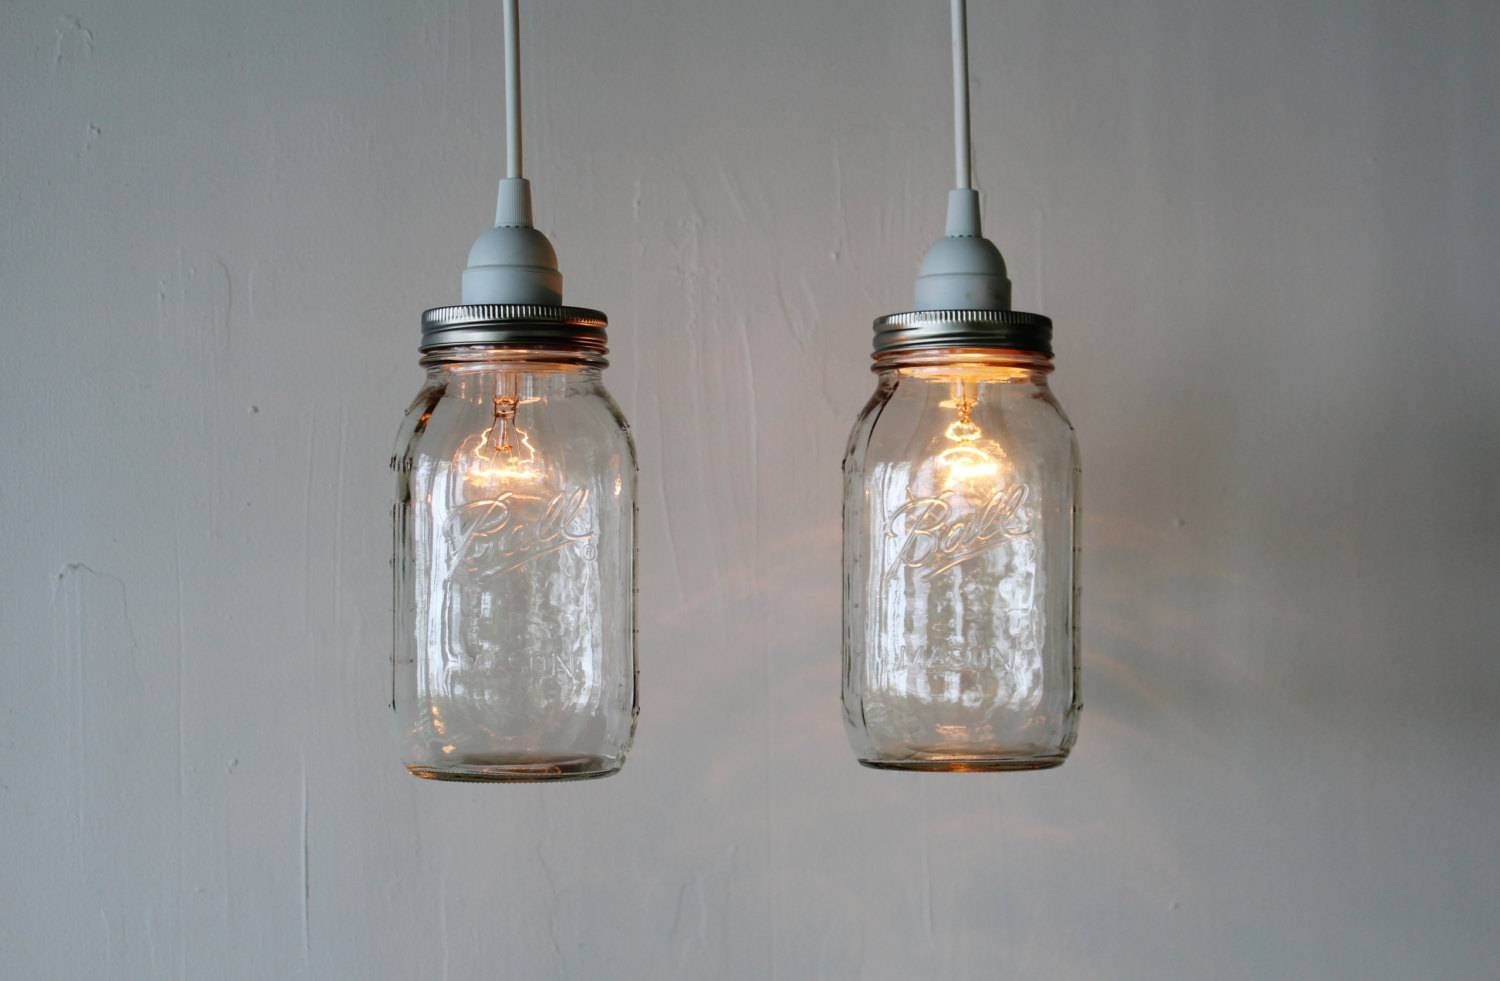 Pair Of Mason Jar Hanging Pendant Lights Upcycled Rustic With Custom Pendant Lights (View 3 of 15)